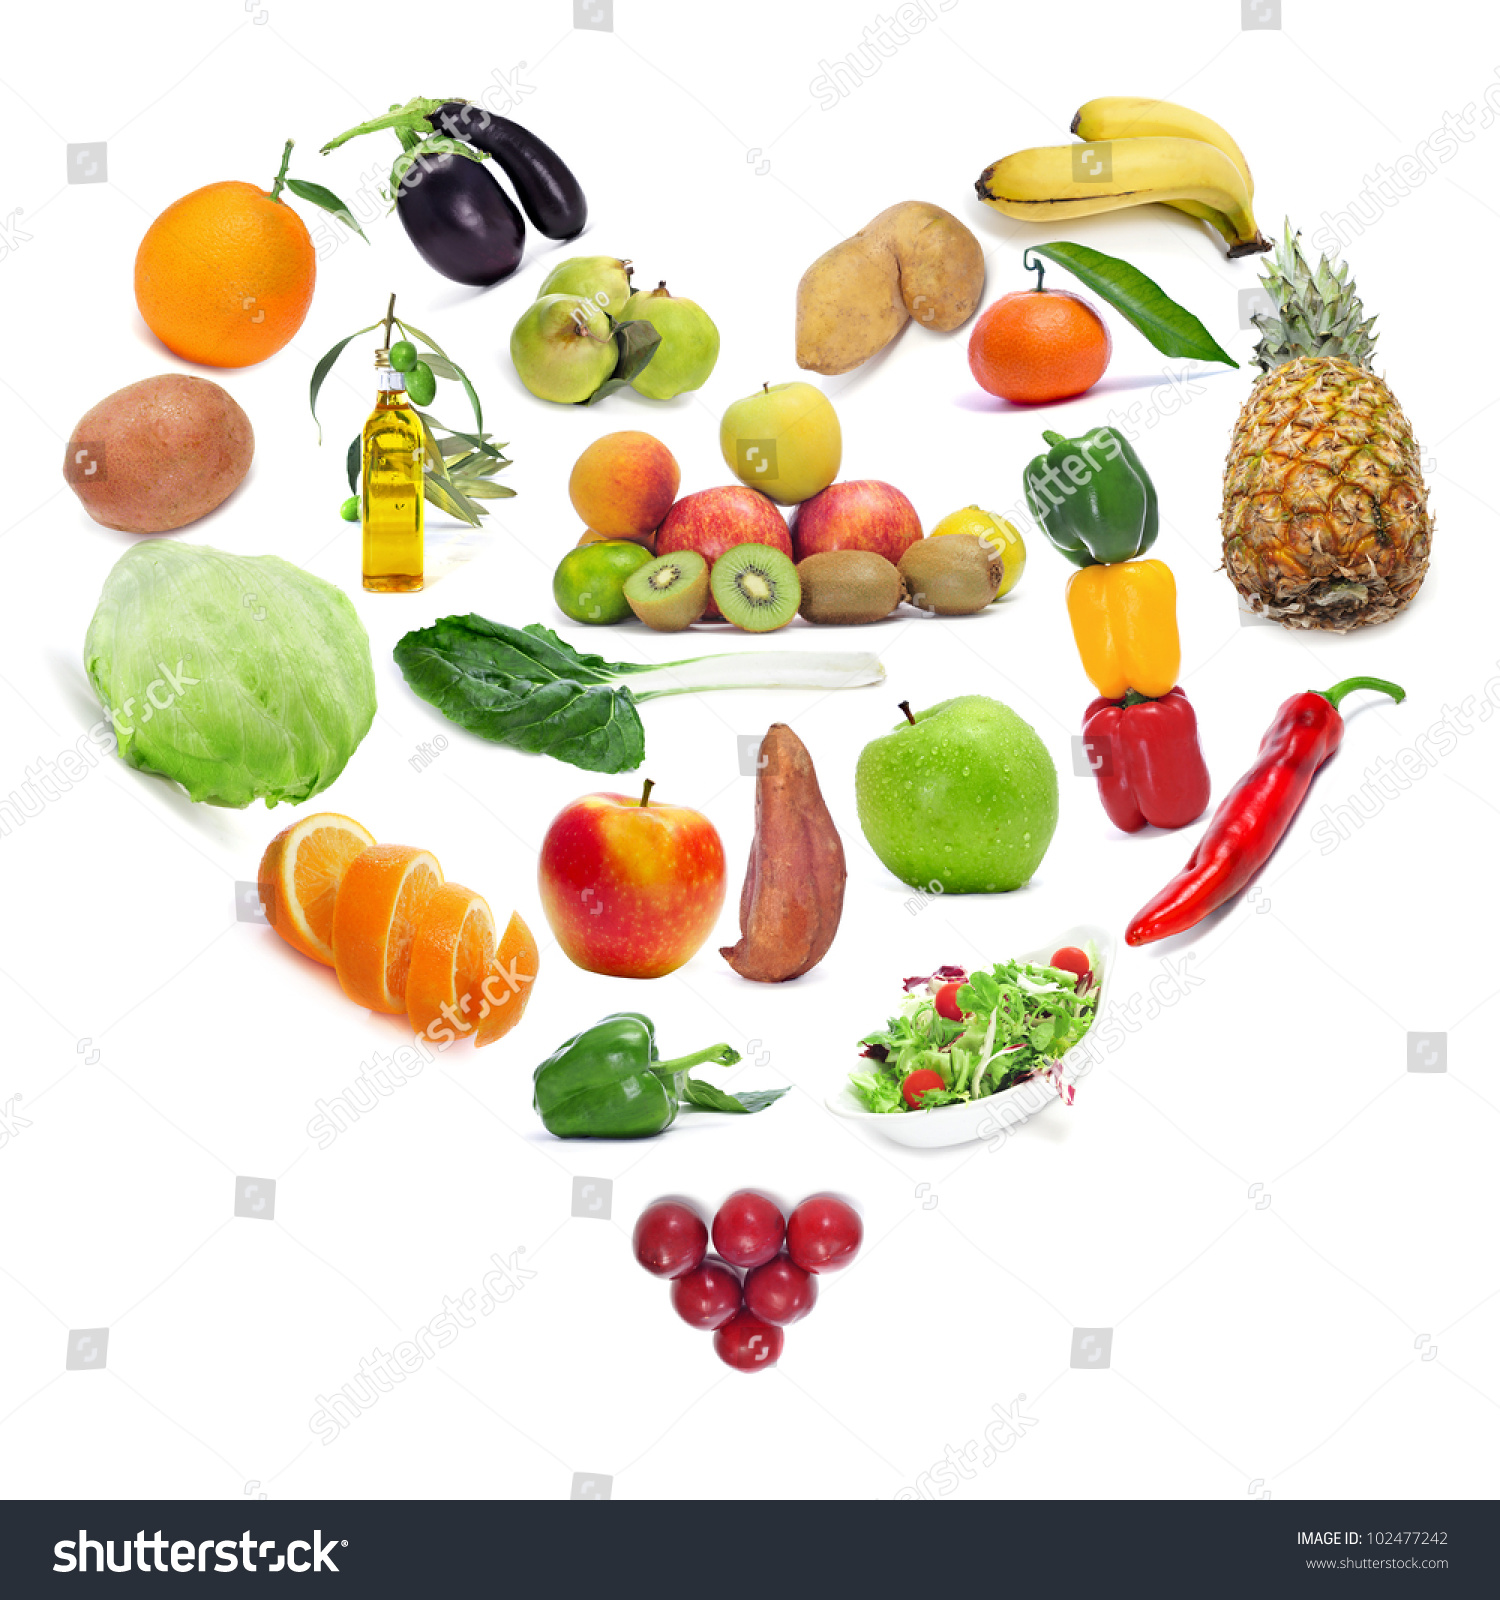 Love For The Healthy Food: Fruits And Vegetables Forming A Heart Stock ...